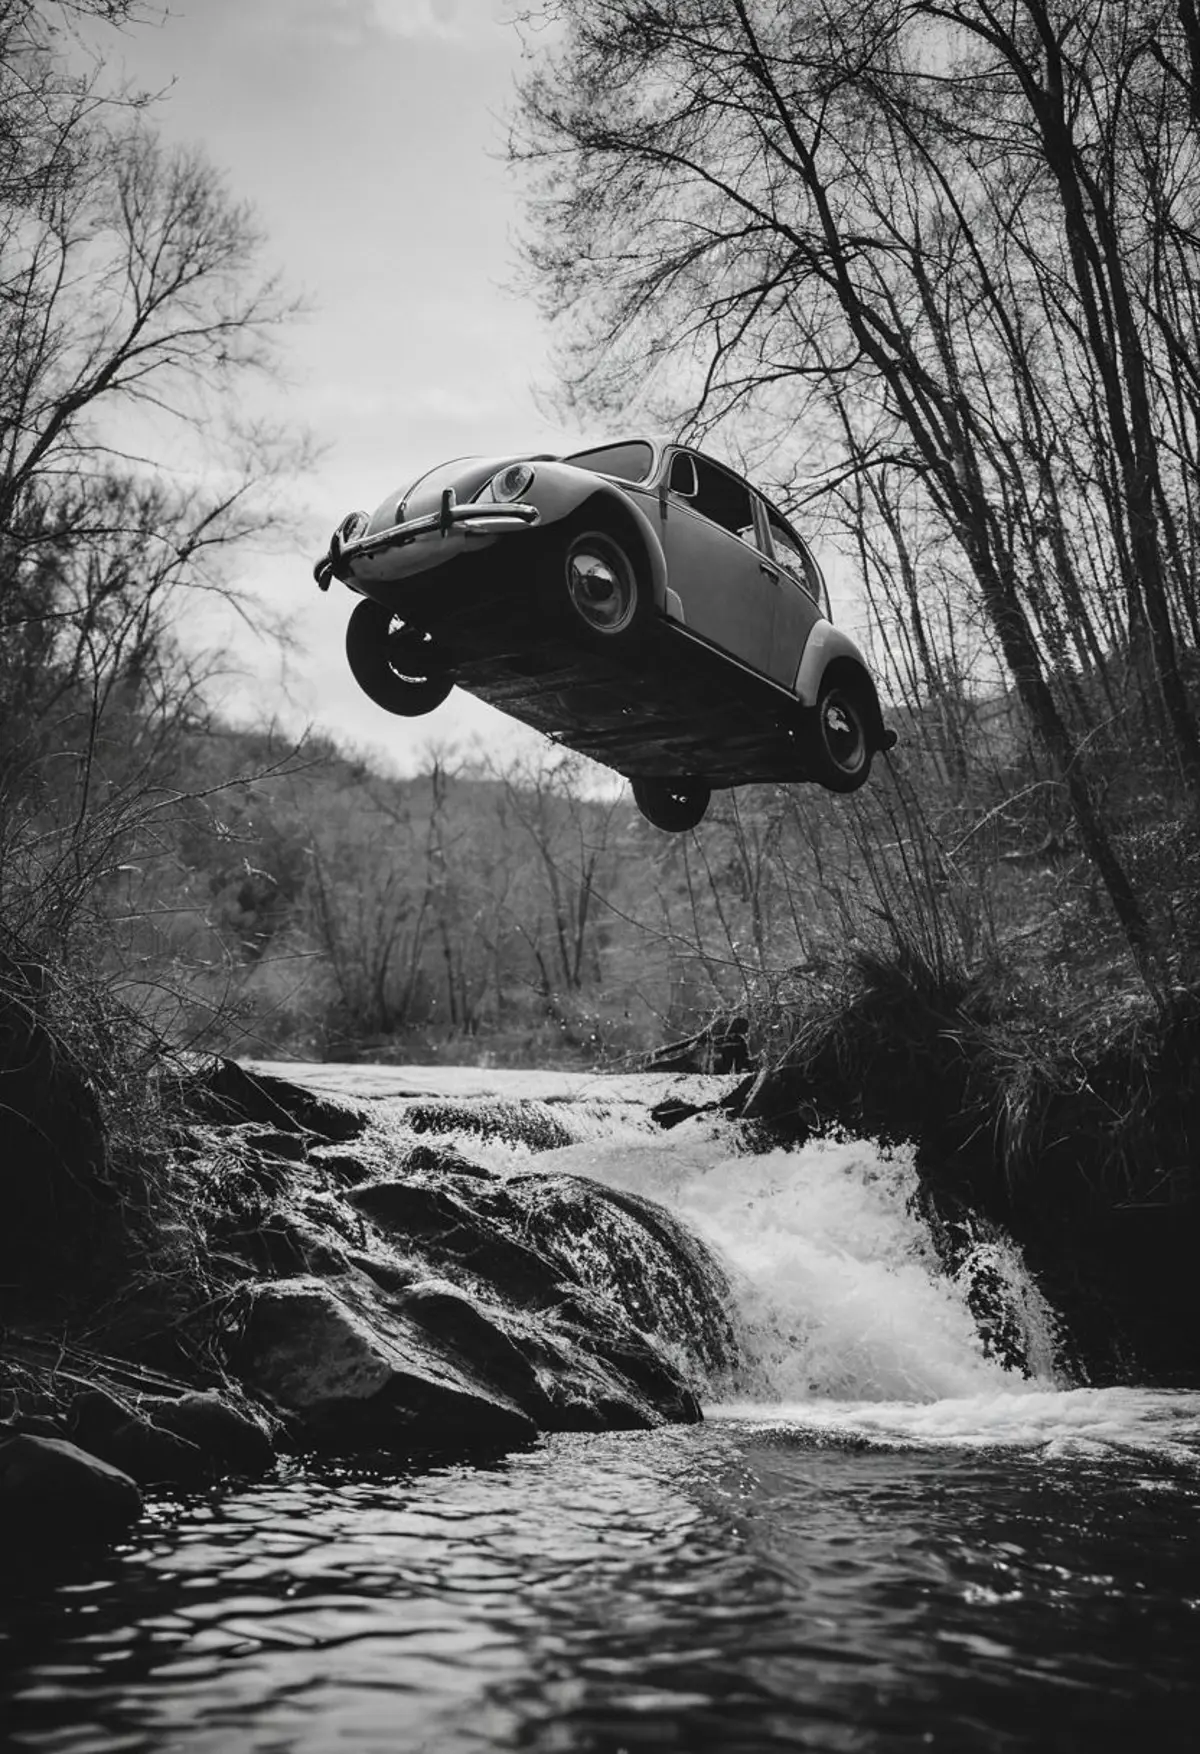 A monochrome scene of a classic car seemingly suspended in midair while jumping over a rocky creek. The surrounding landscape is filled with leafless trees, suggesting a late autumn or winter season. 